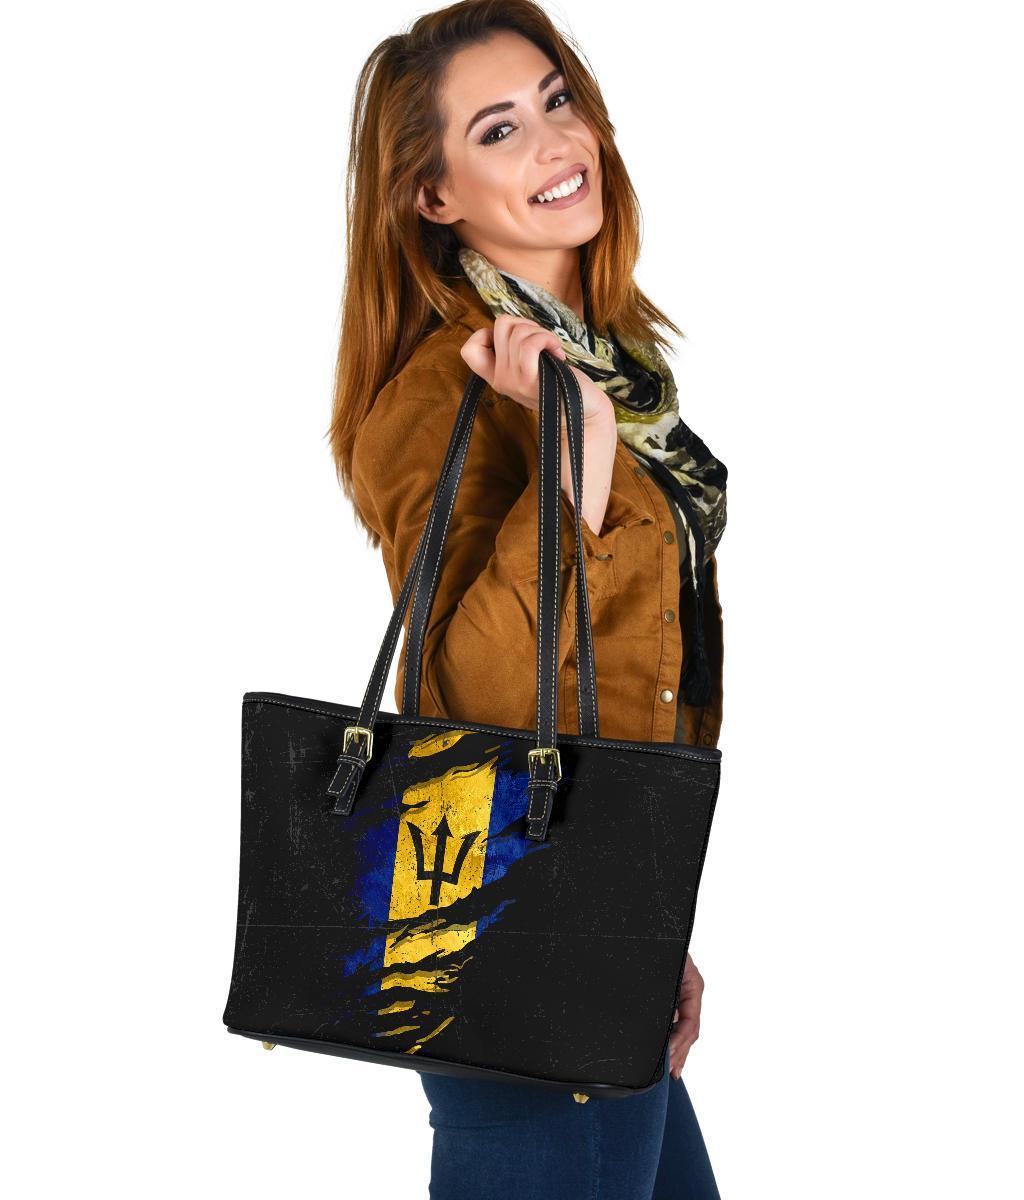 barbados-in-me-small-leather-tote-special-grunge-style